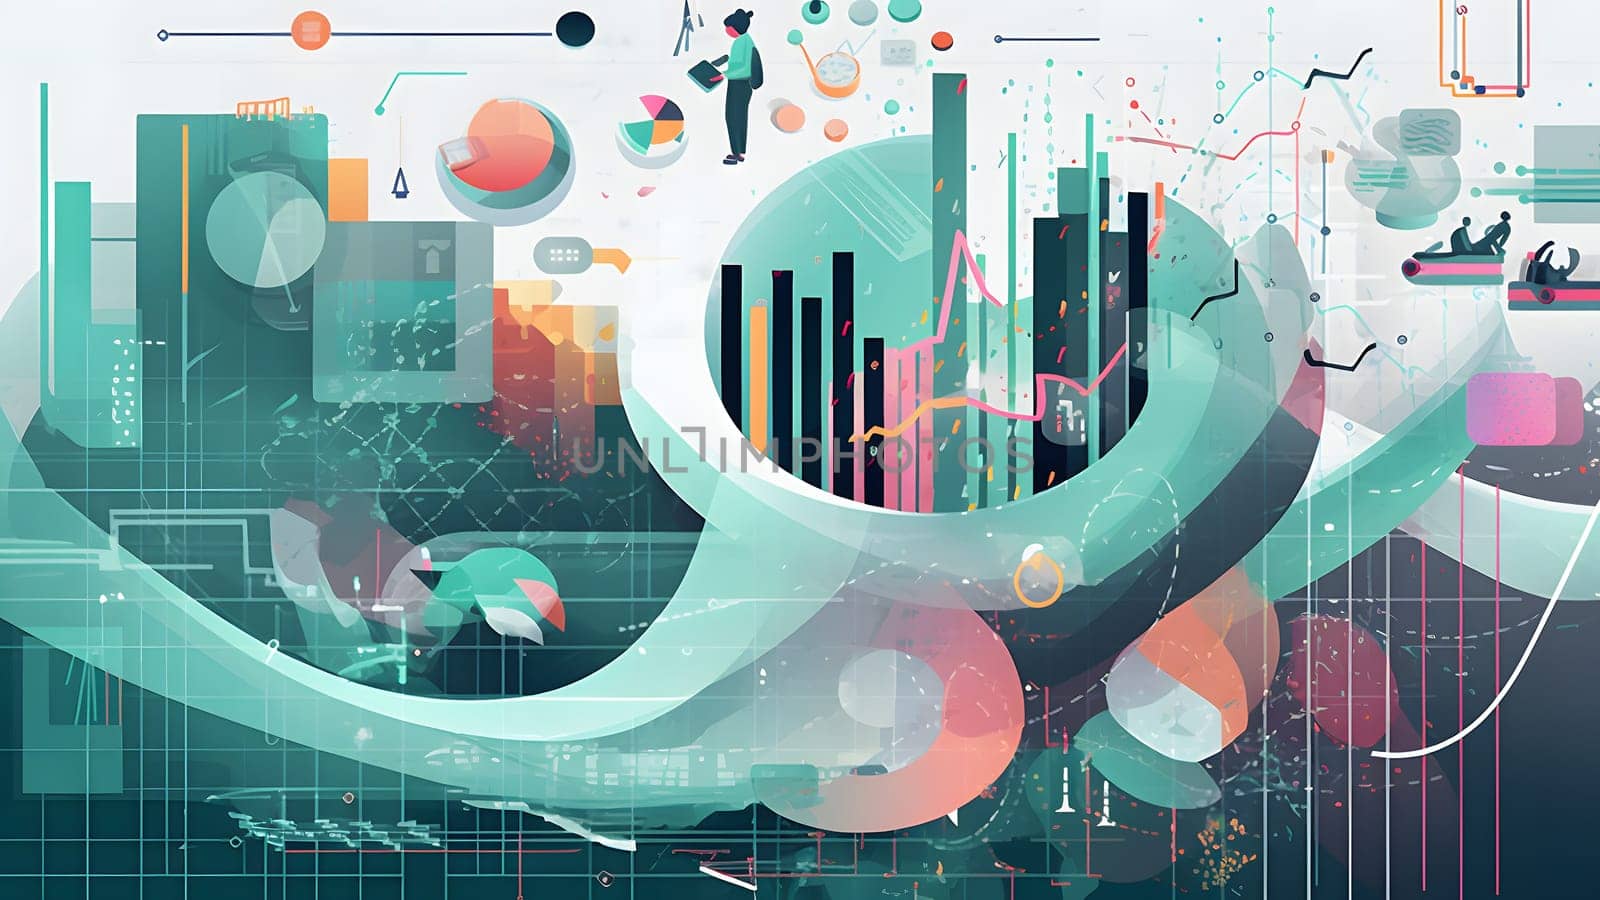 data science-inspired wallpaper depicting the visual and modern process of data collection, cleaning, analysis, and visualization, neural network generated image by z1b